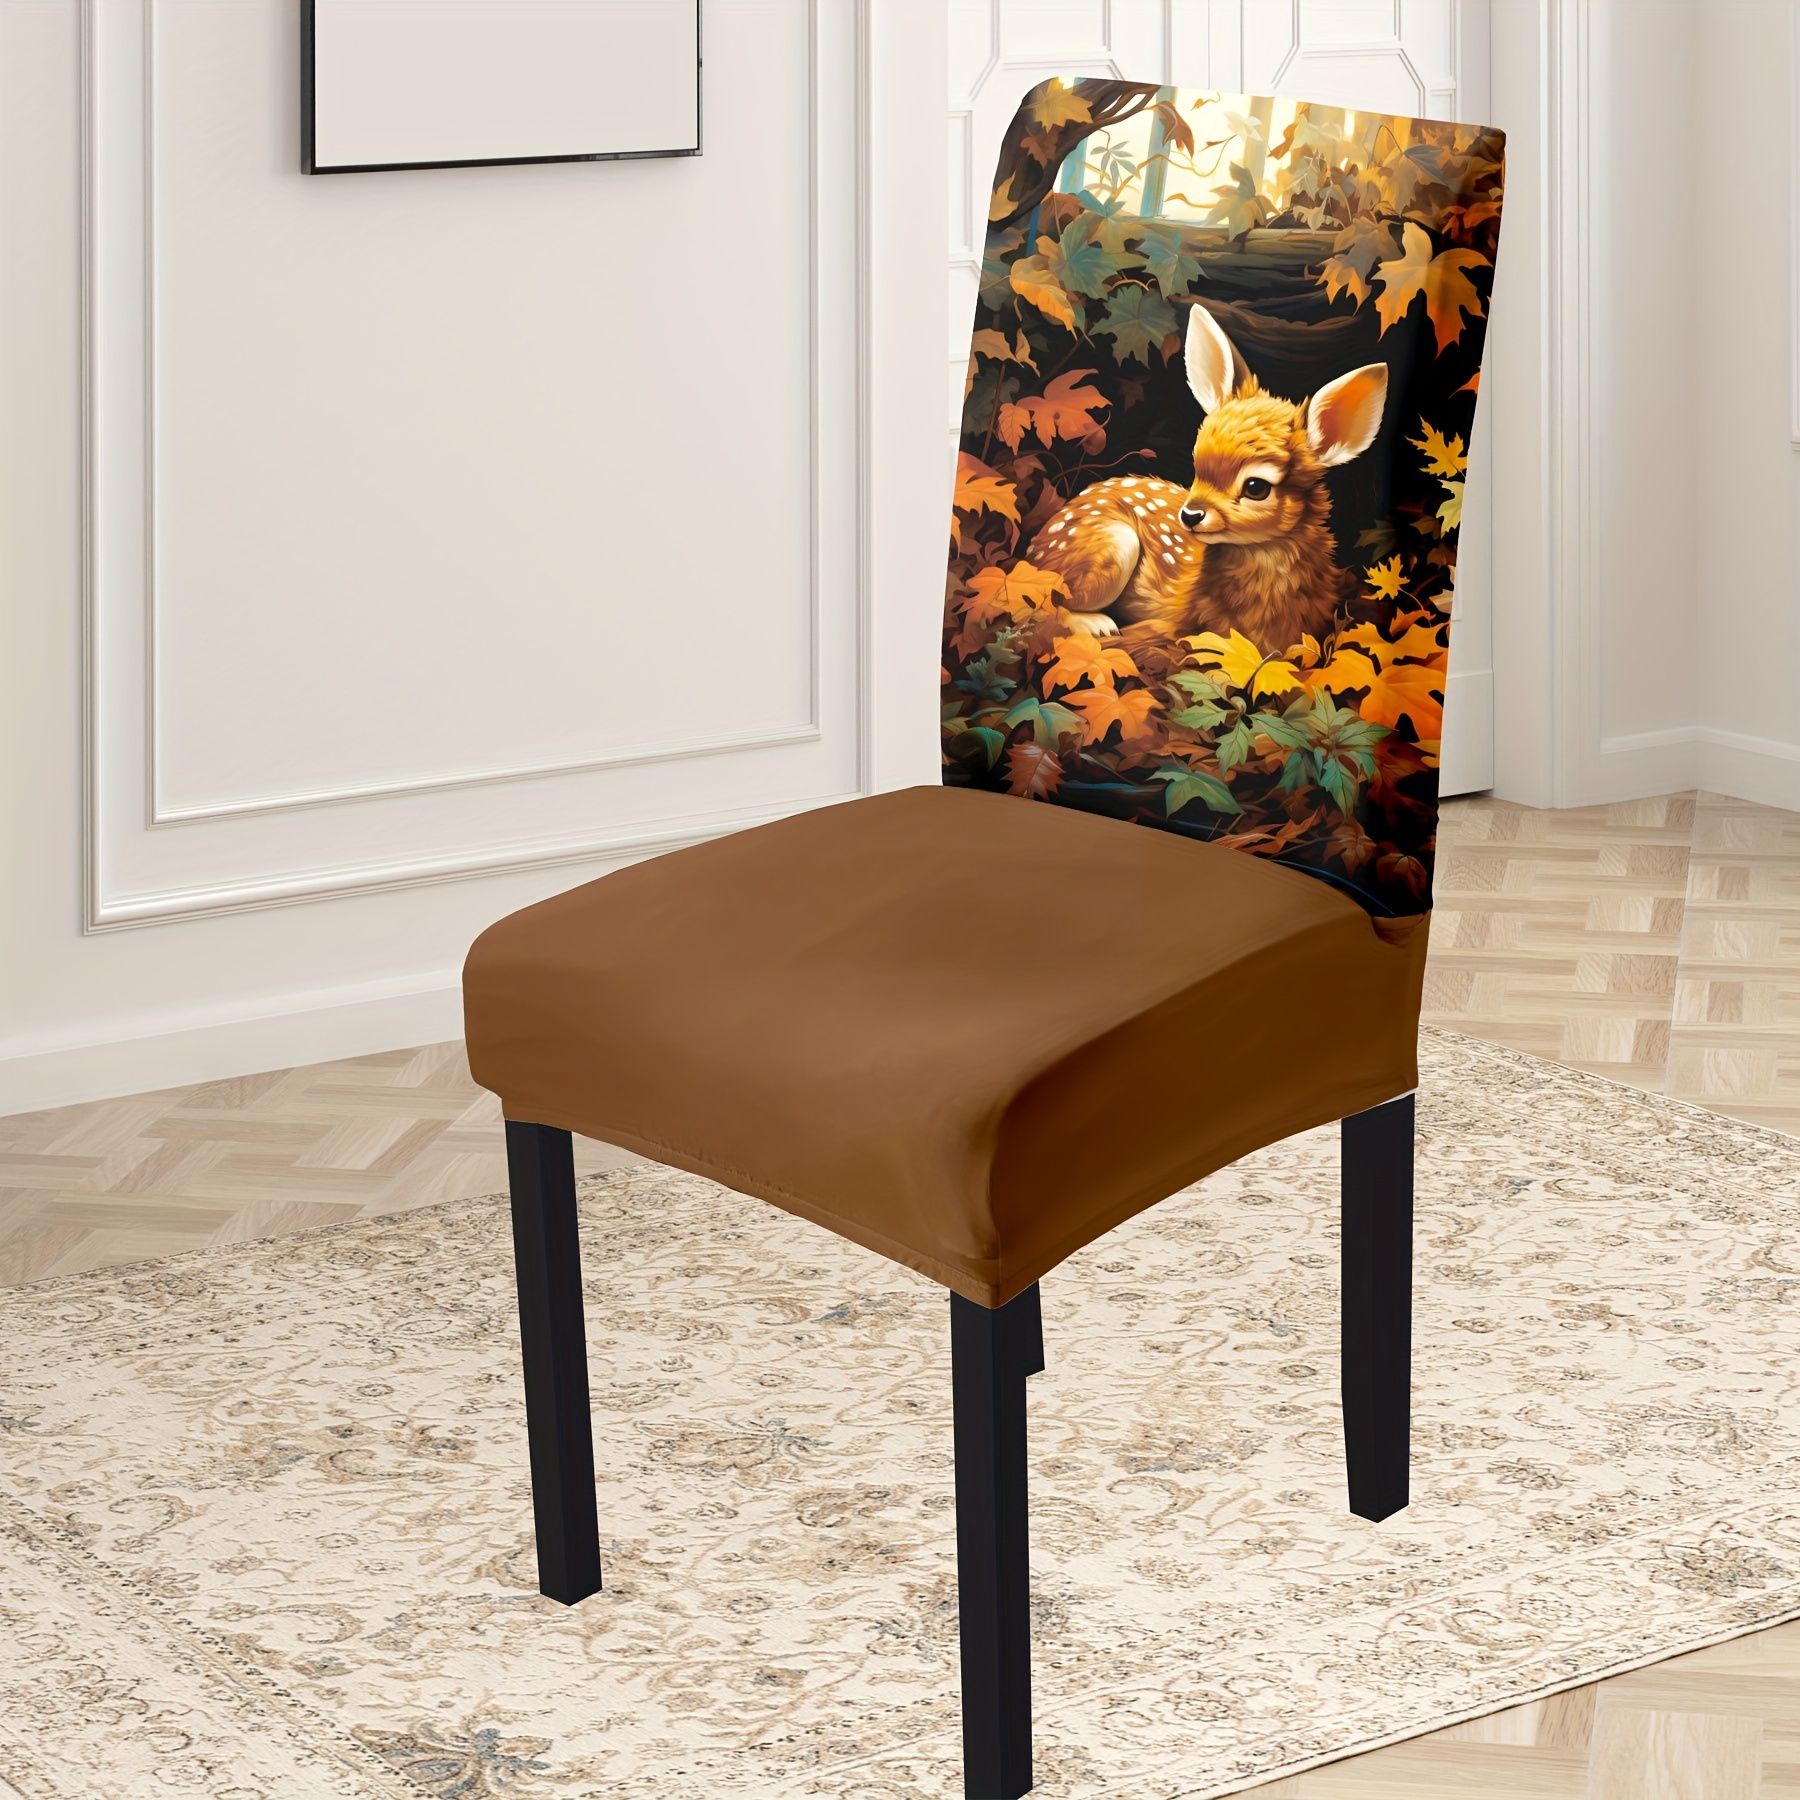 

4/6pcs Autumn Maple Deer Print Chair Covers - High Elasticity, Machine Washable Milk Silk Slipcovers For Dining, Garden Chairs - Dustproof & Stain Resistant